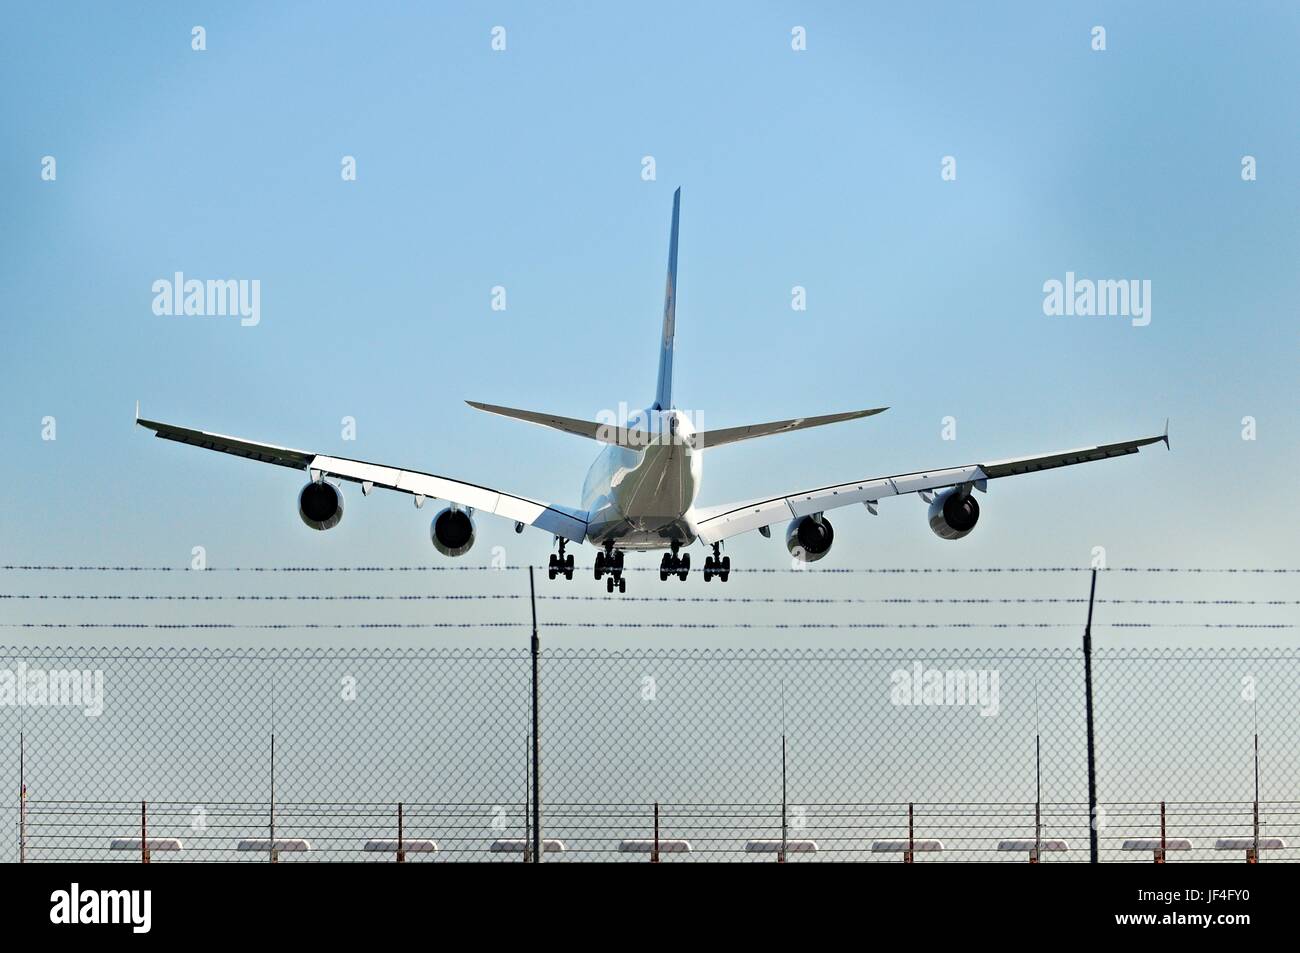 Airbus A380-800 at the landing Stock Photo